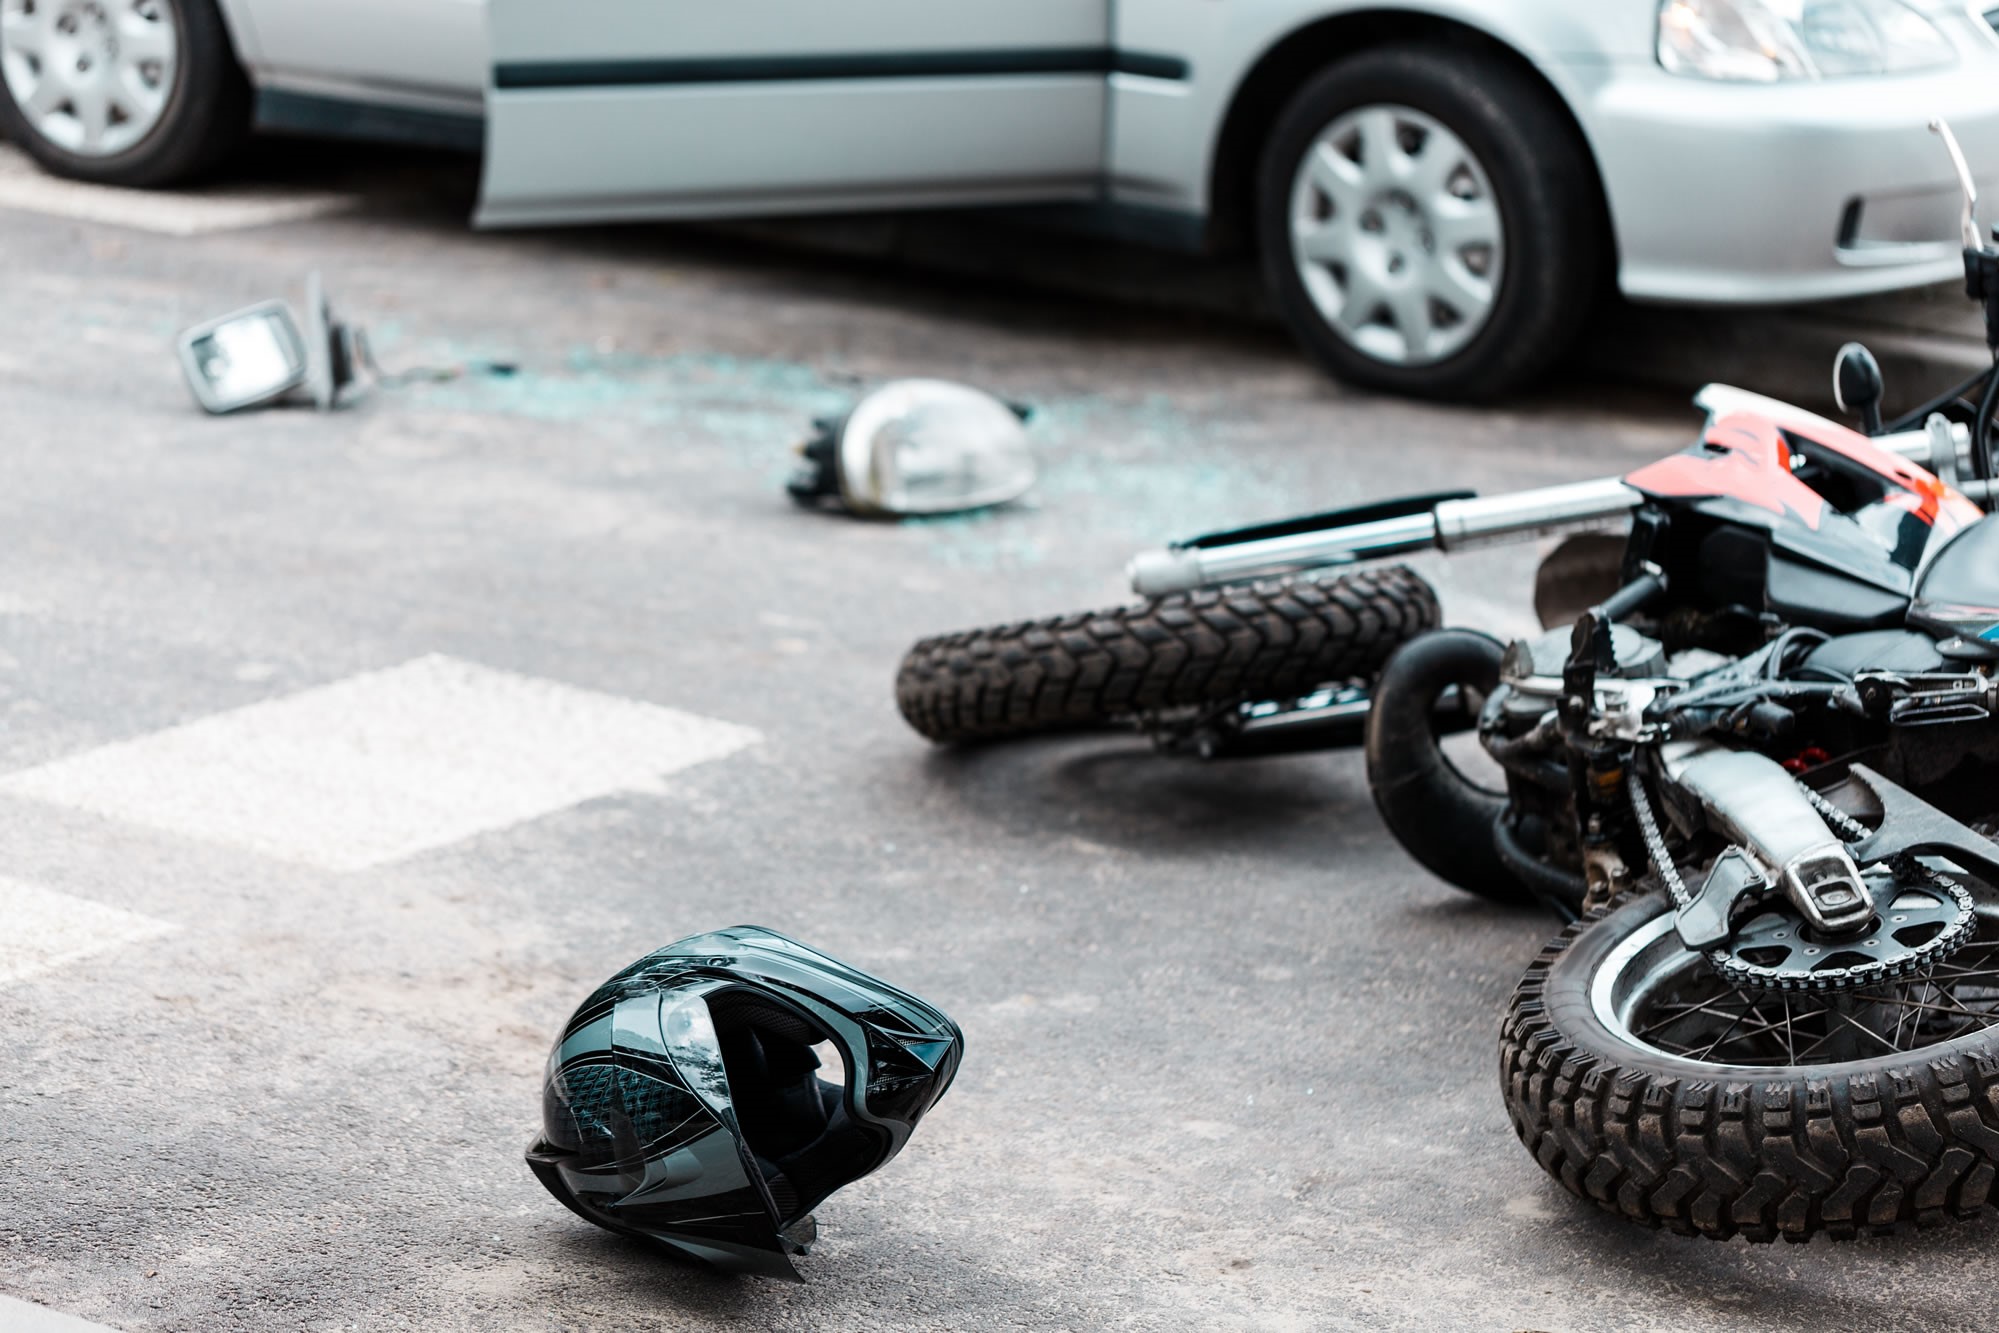 Motorbike, Motorcycle Accident, claims solicitors Cardiff